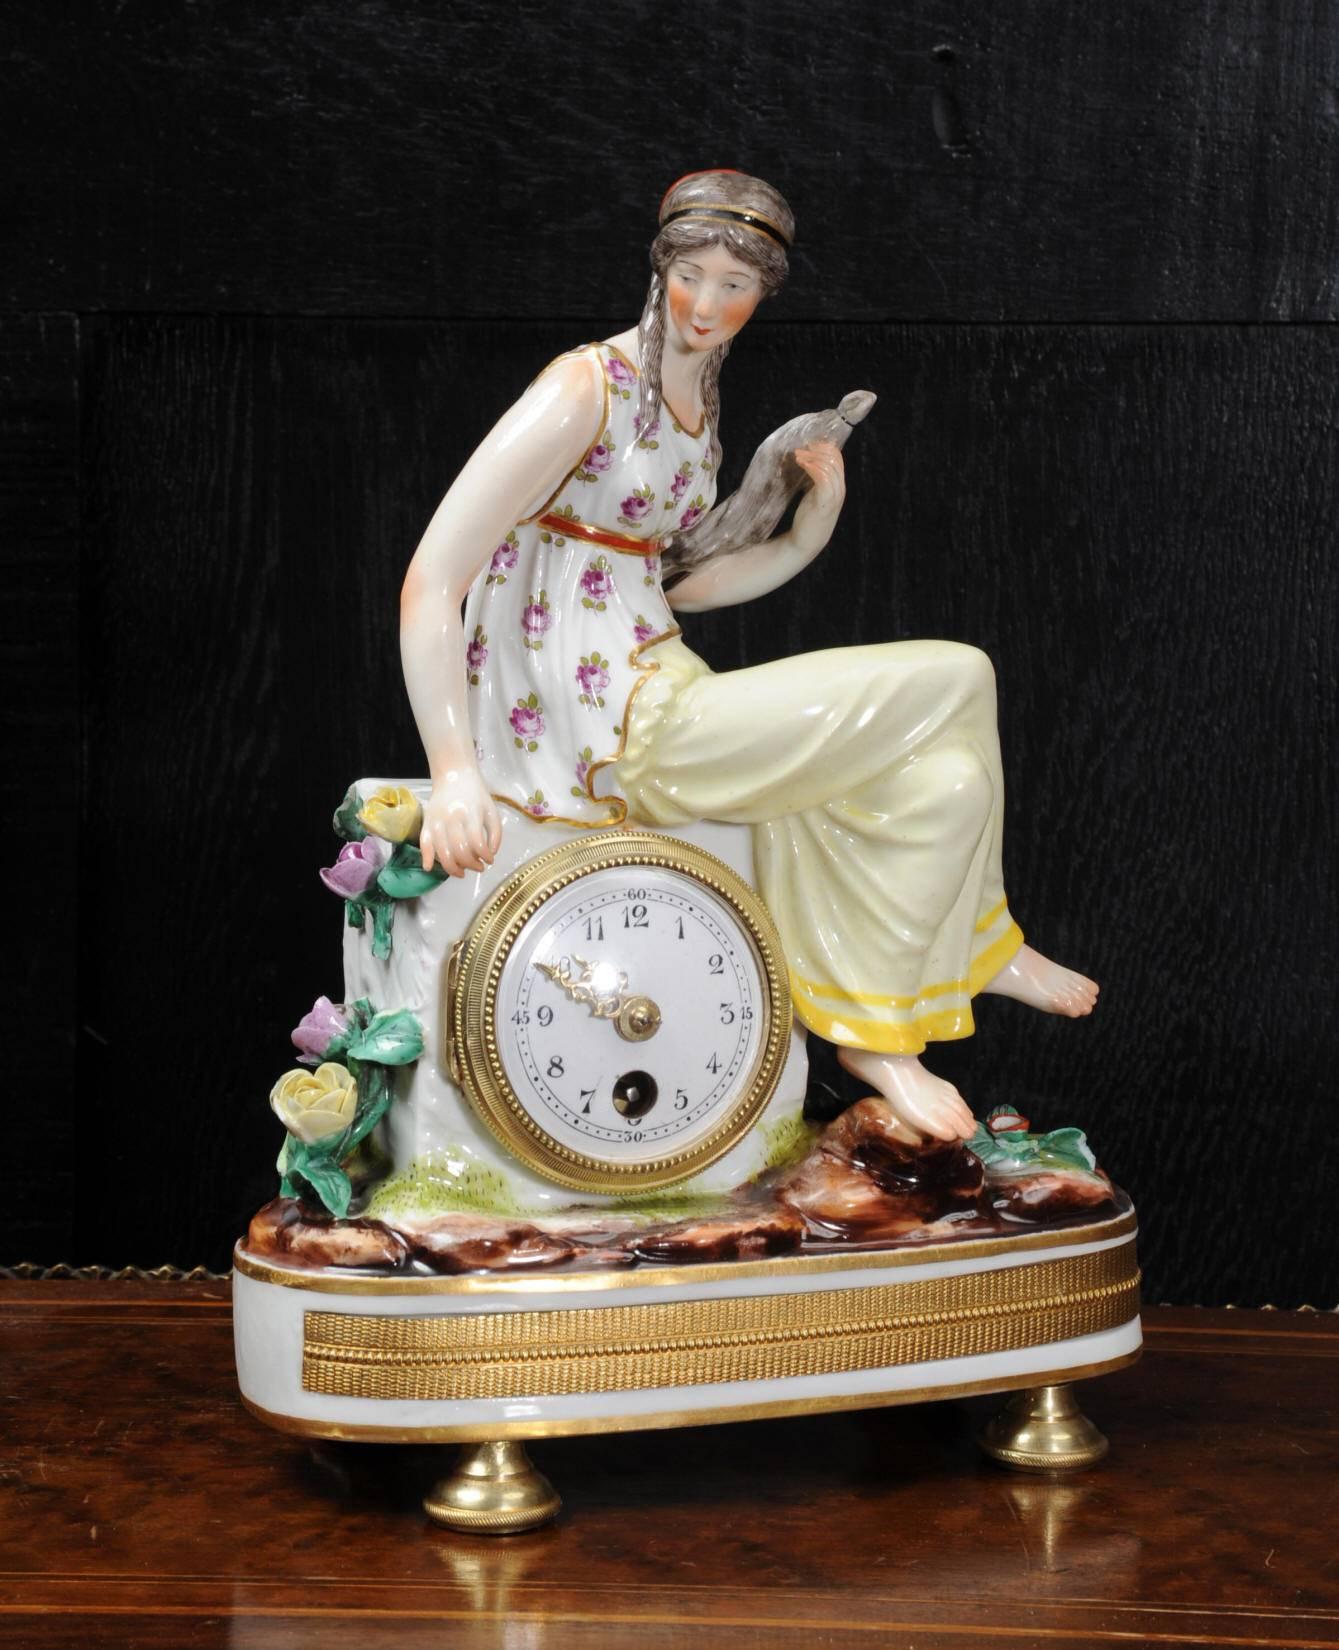 A beautiful Royal Vienna type porcelain boudoir clock featuring a classical maiden seated on a rock. She is holding a dove and is surrounded by delicate flowers. The tiny French movement is mounted in the rock and has an enamel on copper dial with